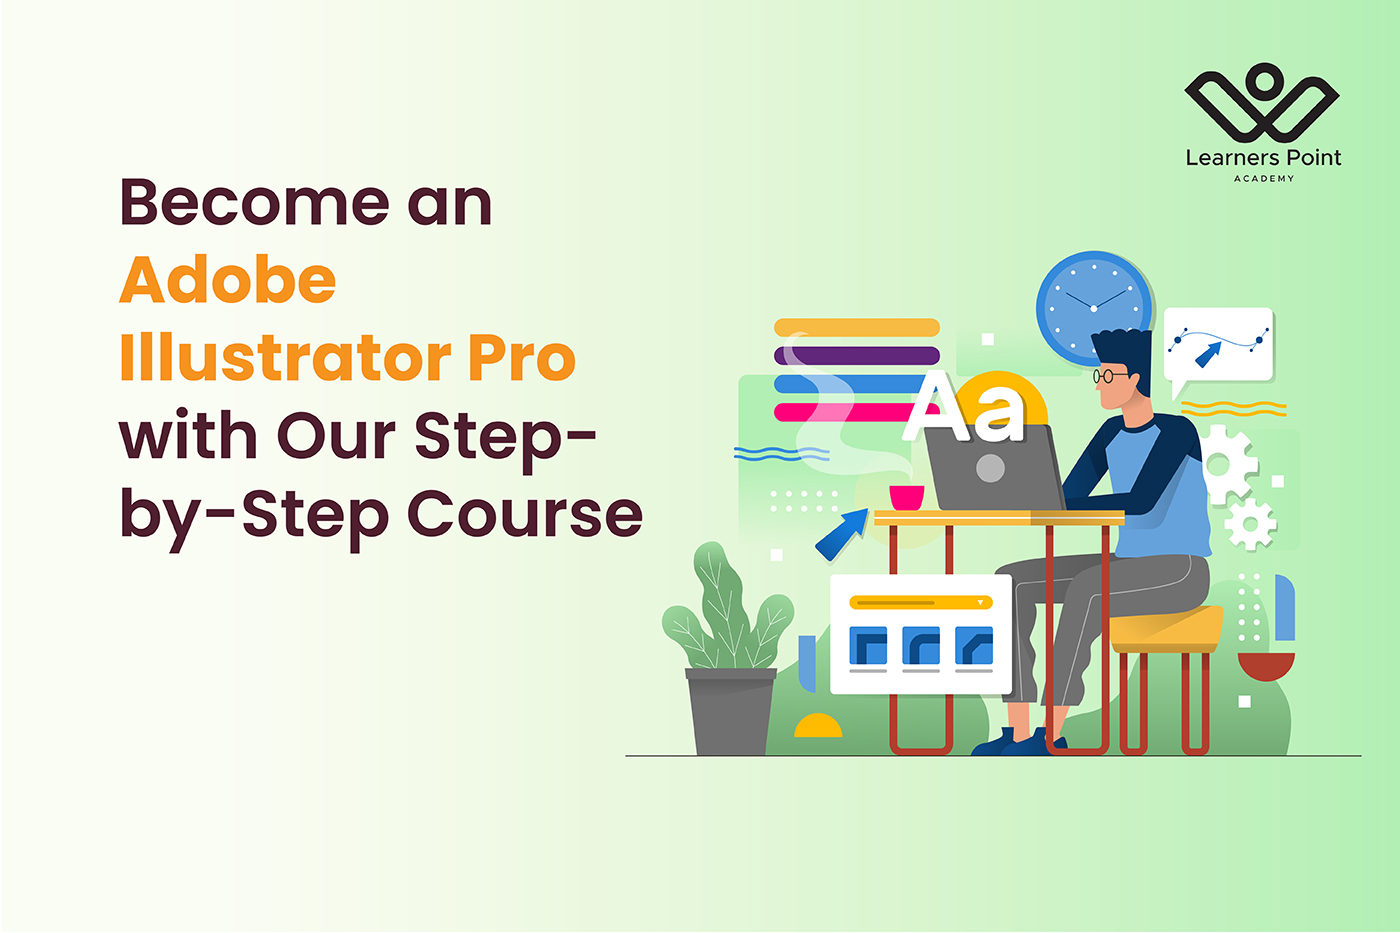 Become an Adobe Illustrator Pro with Our Step-by-Step Course